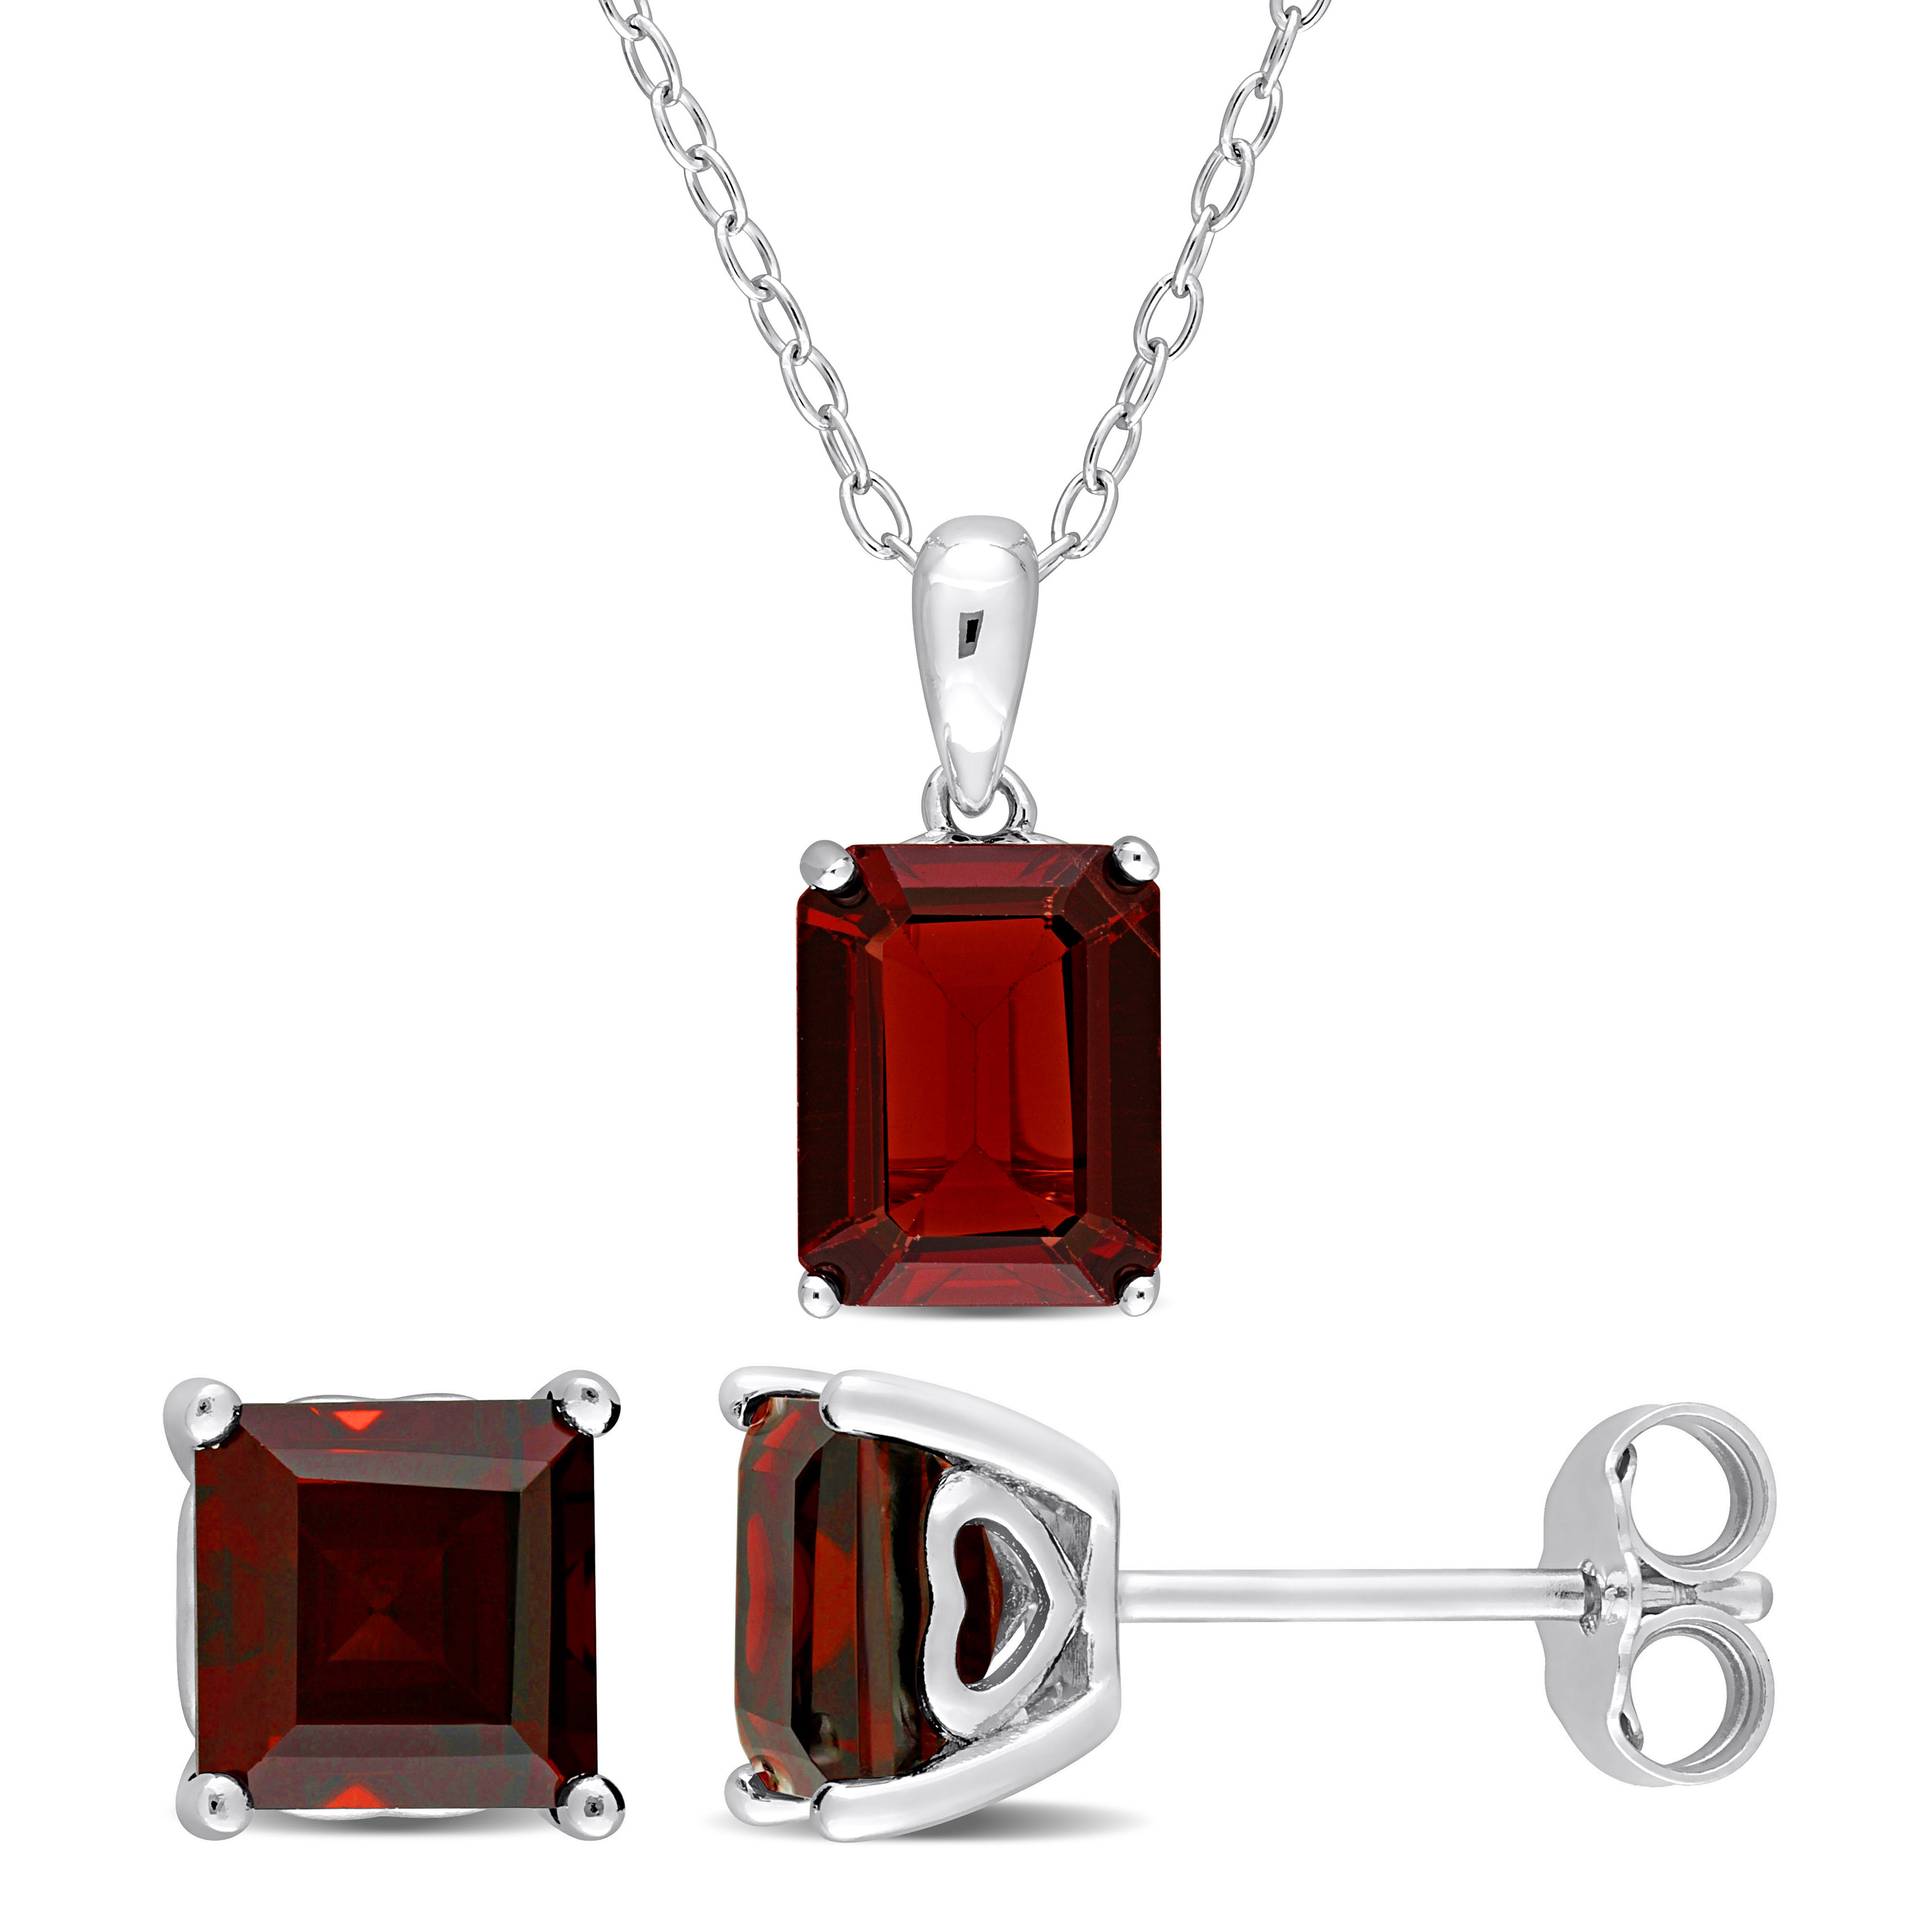 7 4/5 CT TGW Emerald-Cut and Octagon Garnet 2-Piece Solitaire Pendant with Chain and Stud Earrings Set in Sterling Silver